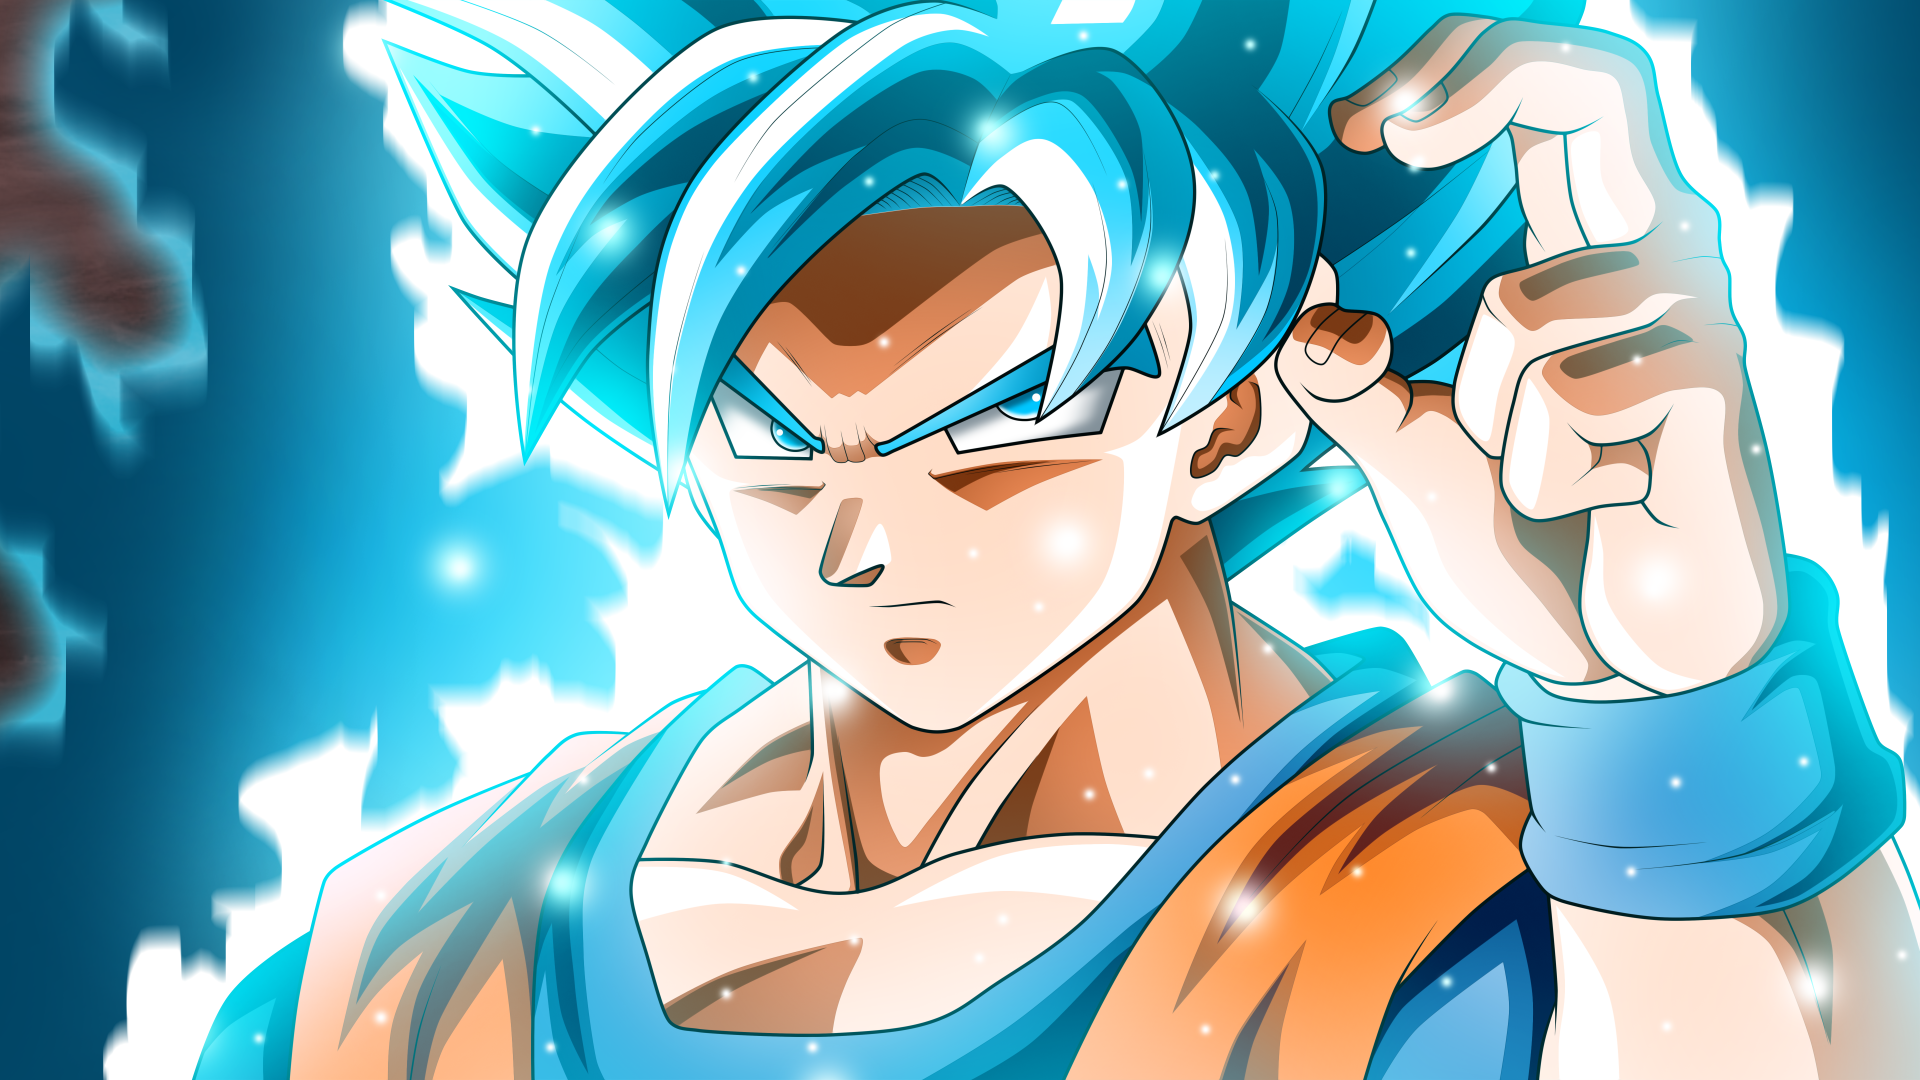 Goku's Blue Hair Transformation in Revival of F - wide 3